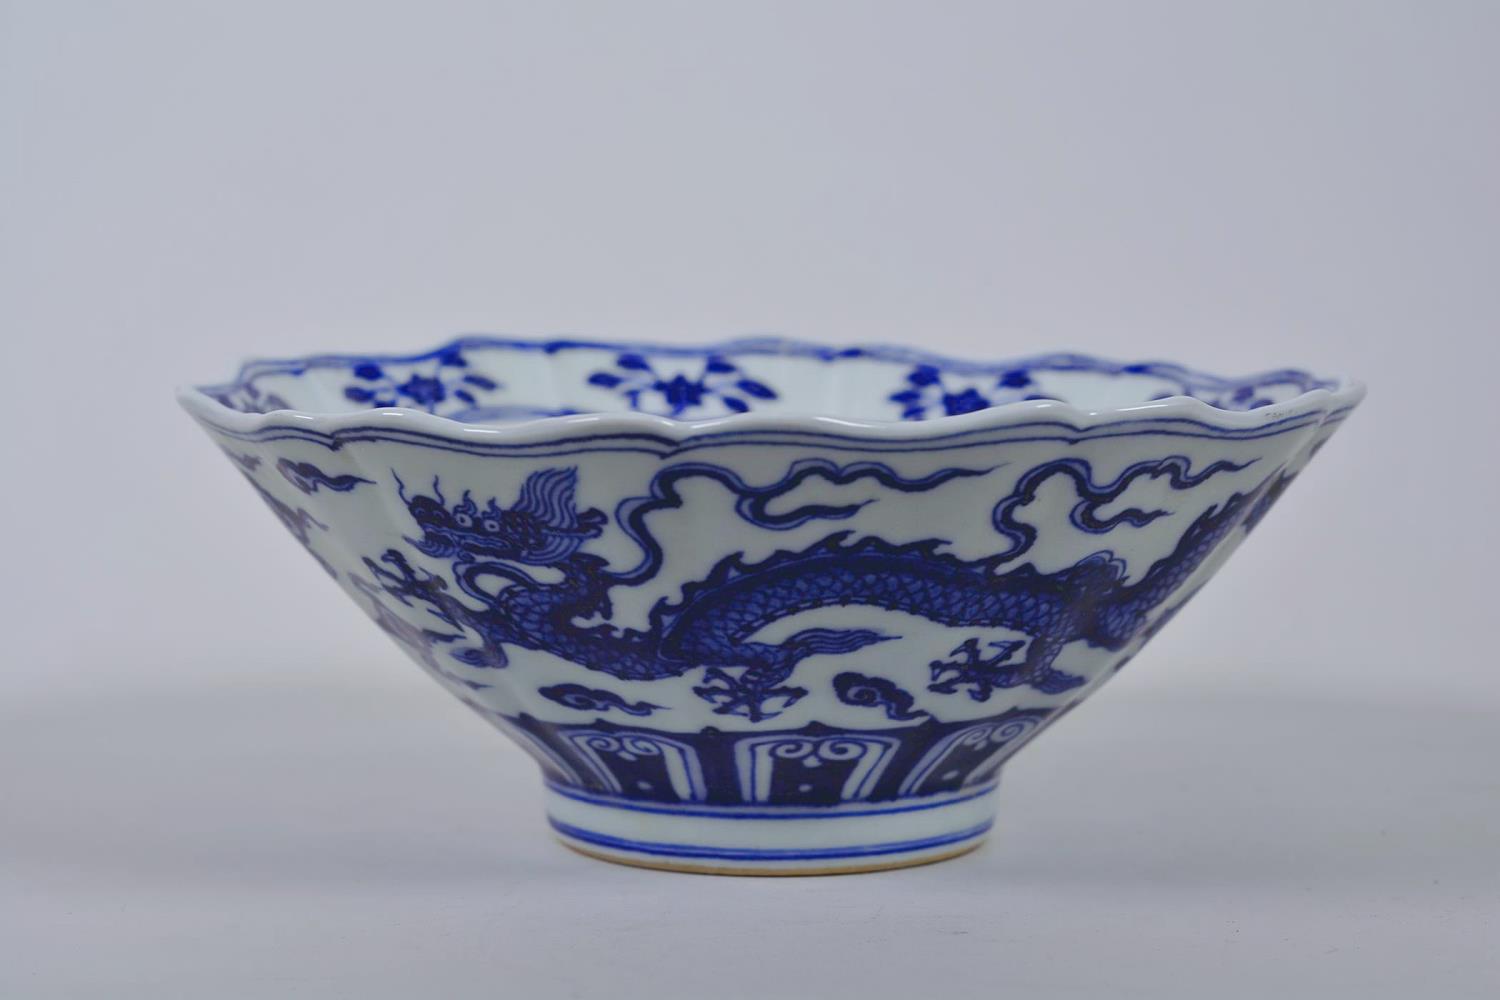 A Chinese blue and white porcelain bowl with a lobed rim and dragon decoration, 6 character mark